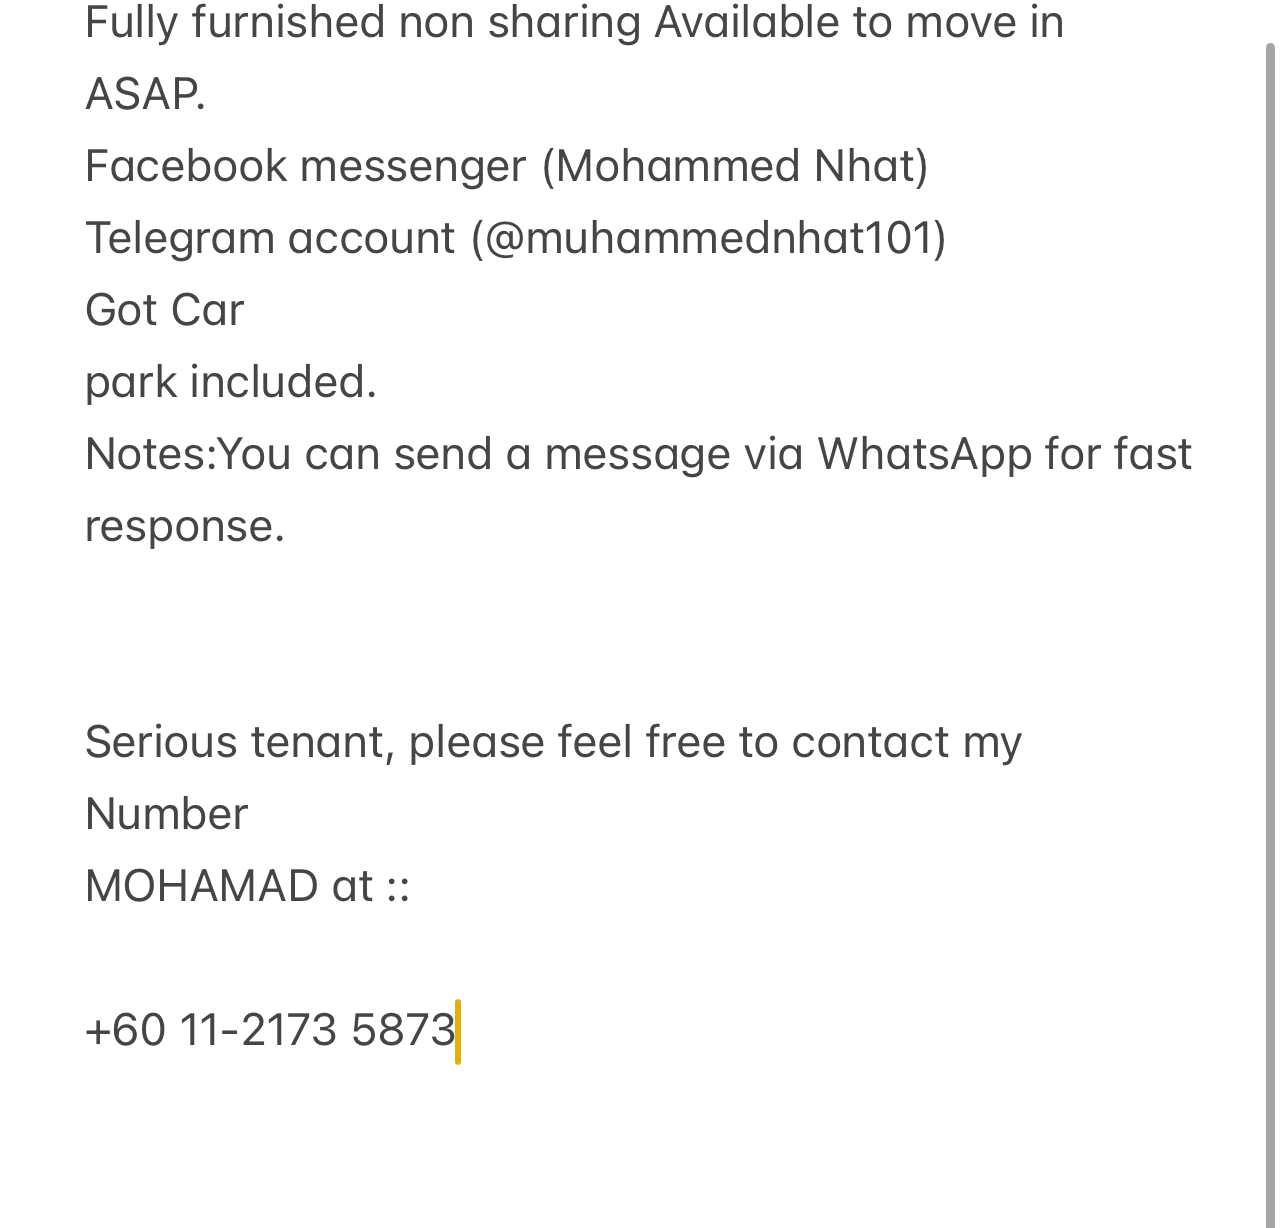 room for rent, studio, jalan teruntong, Send the owner a message on WhatsApp/facebook if you want to RENT the unit facebook (Mohammed Nhat)&Telegram(@muhammednhat101) Fully furnished non sharing :(comfortable)